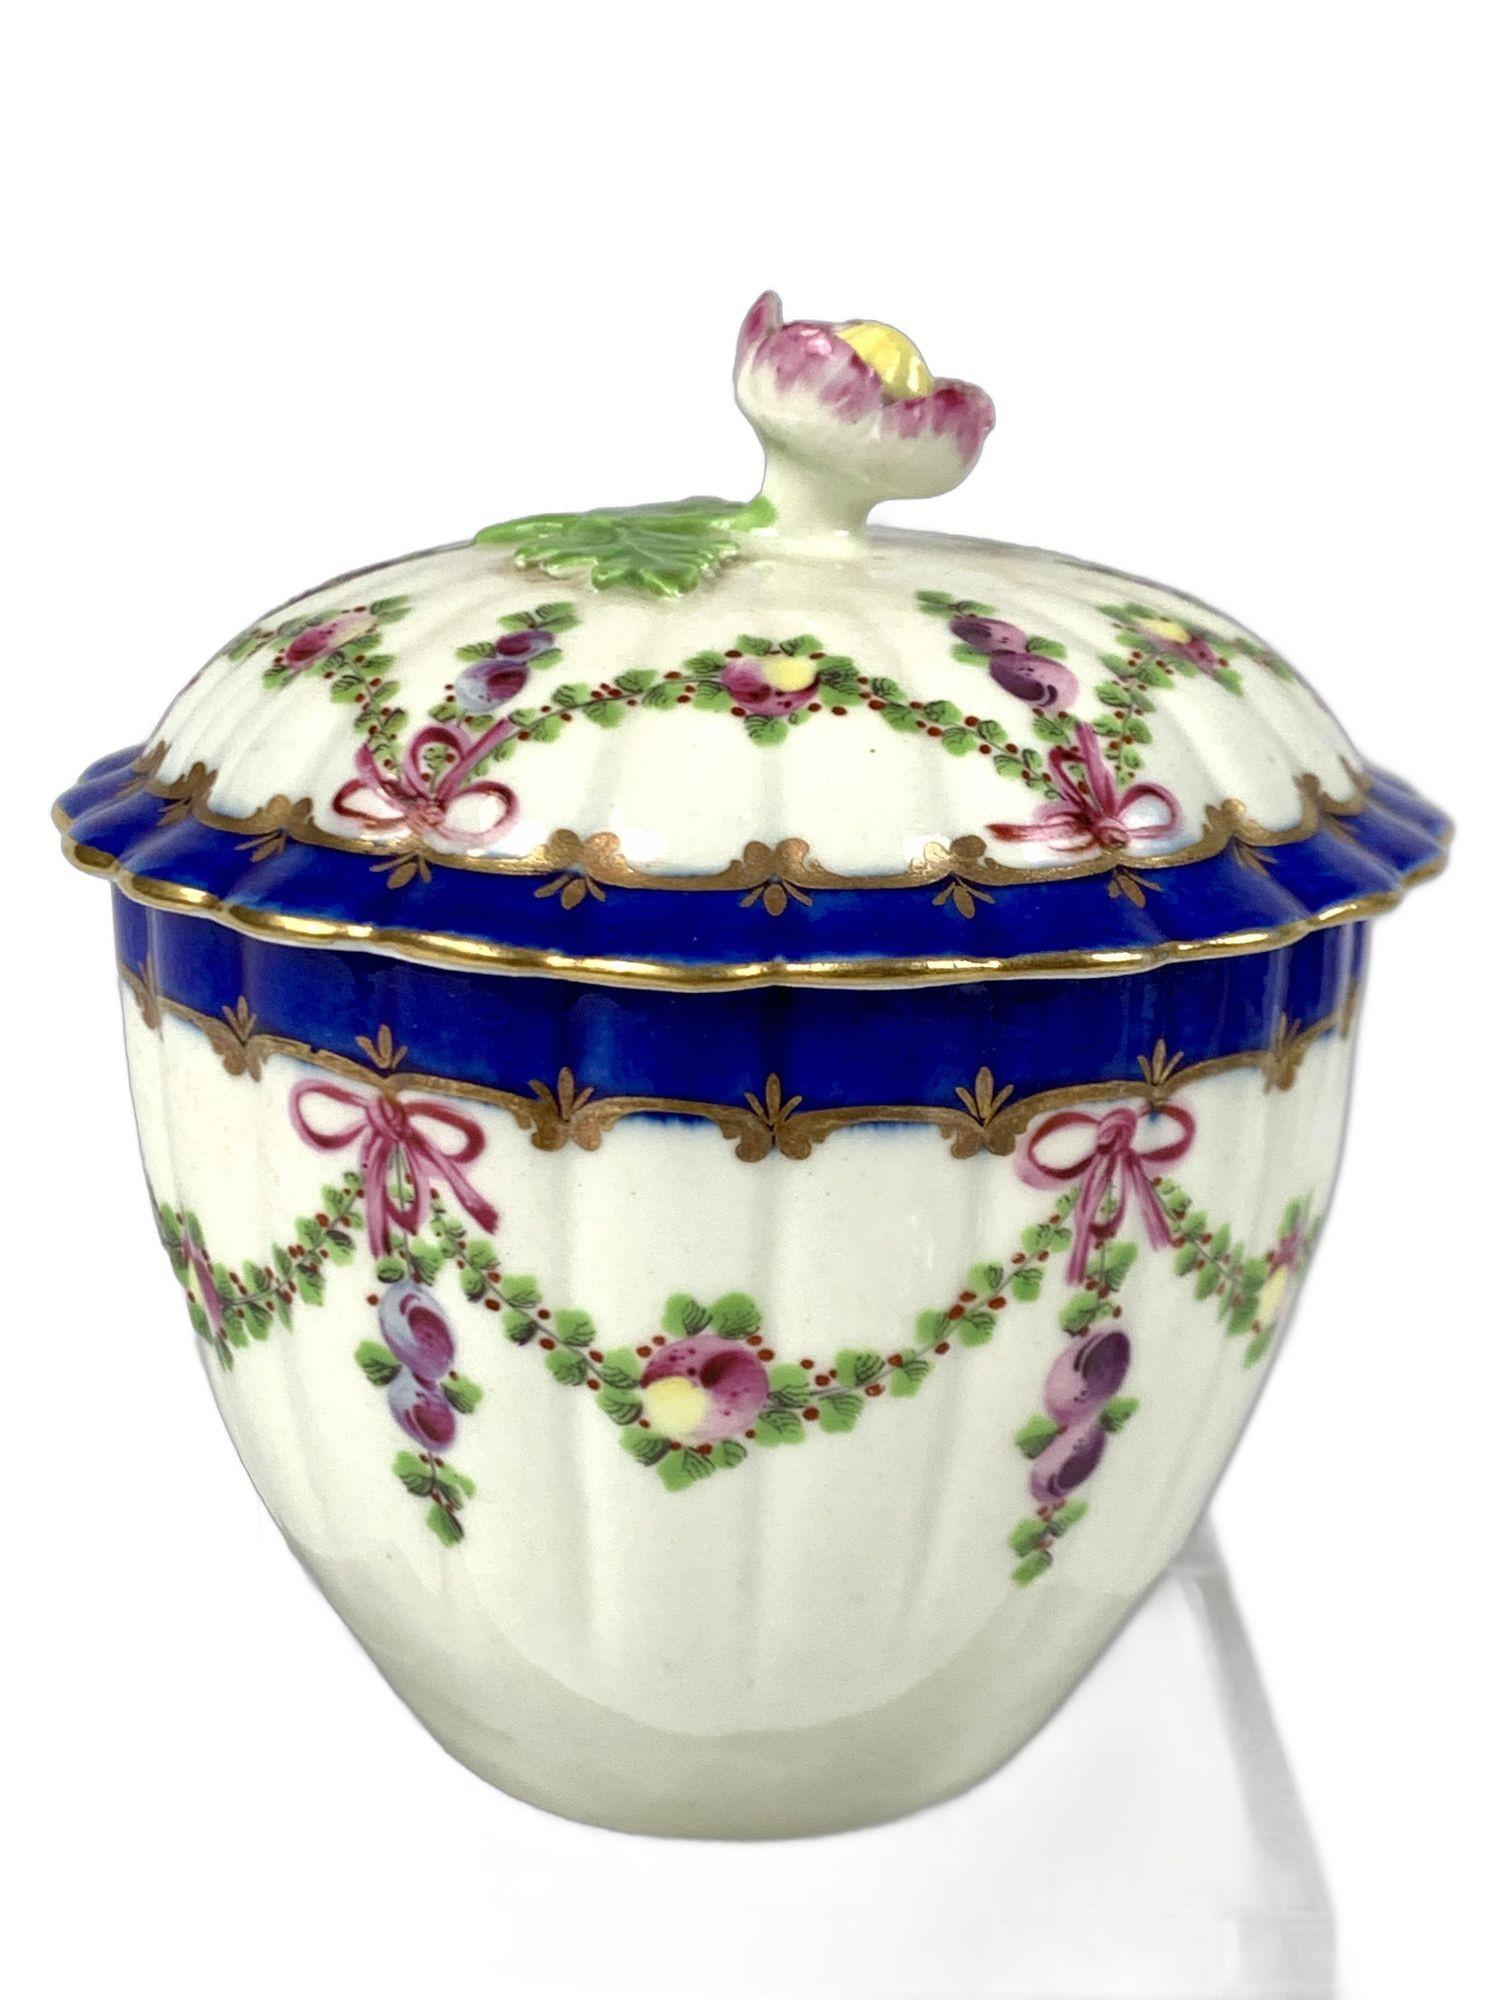 This 18th-century First Period Worcester Porcelain sugar box was hand painted featuring beautiful swags painted with green leaves, purple berries, and two-tone blue and yellow apples.
Each swag is tied with a purple ribbon in an elegant bow. Green